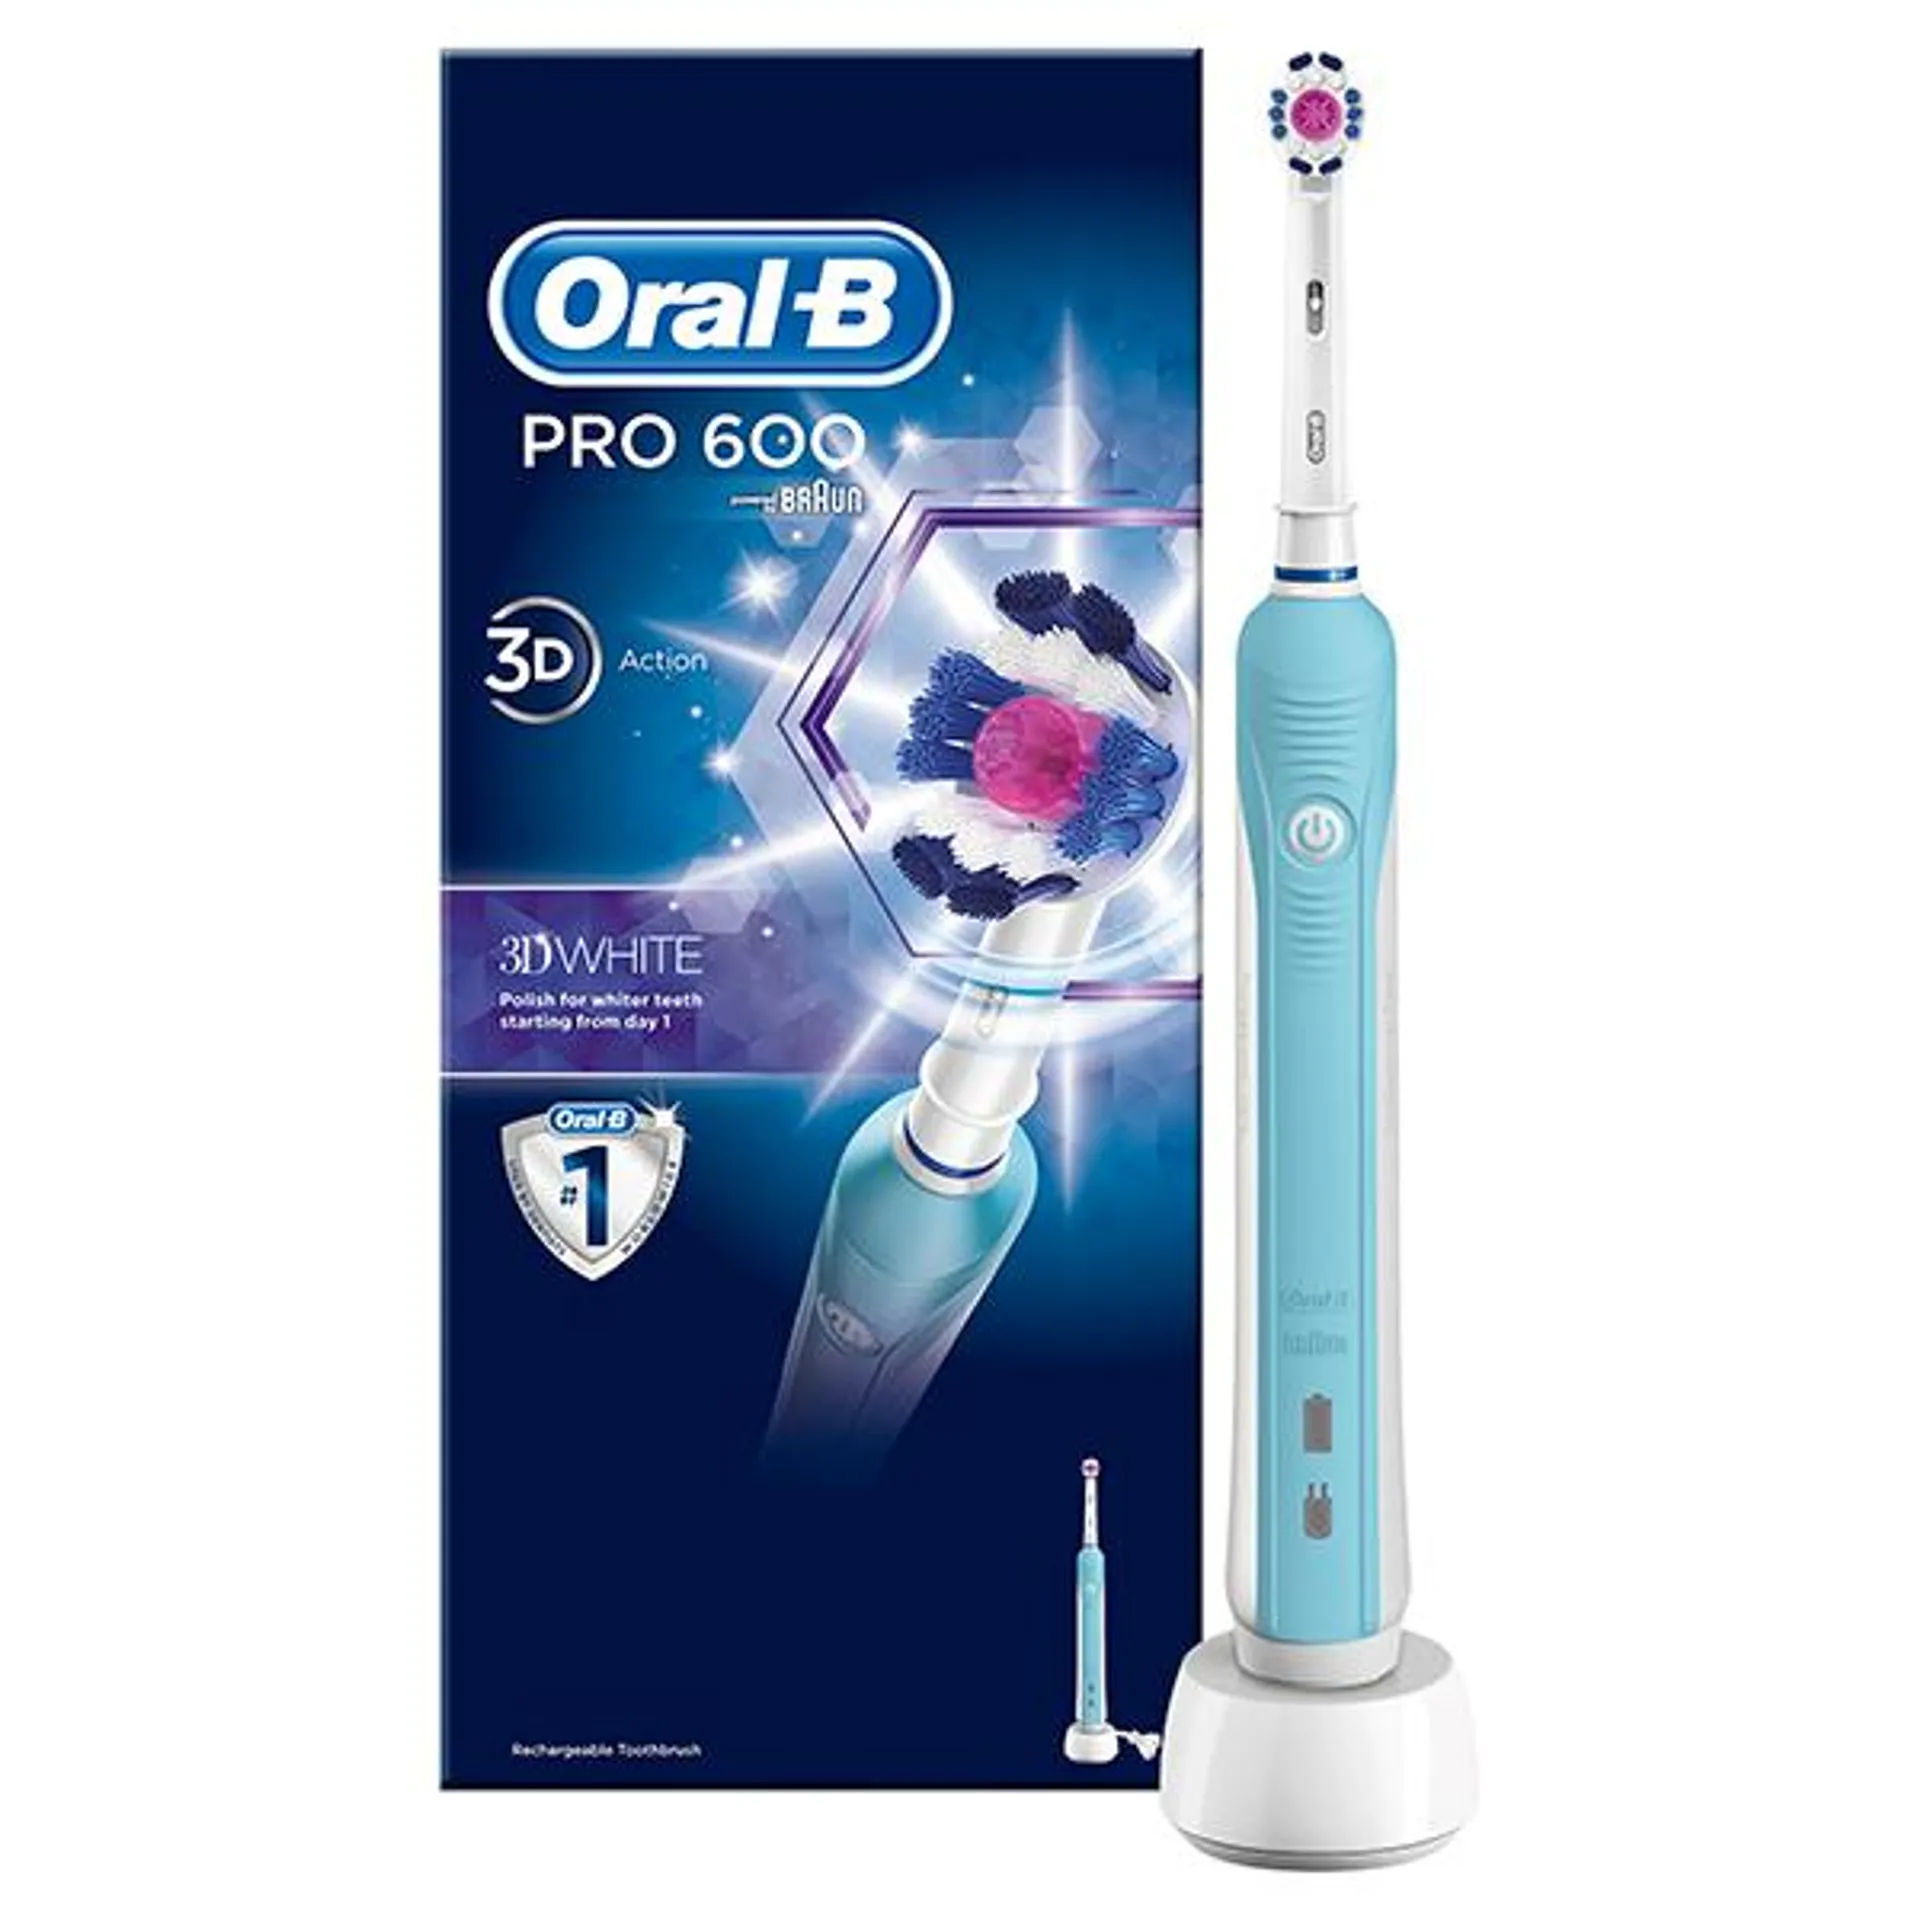 Oral-B Pro 1 600 3D White Electric Rechargeable Toothbrush